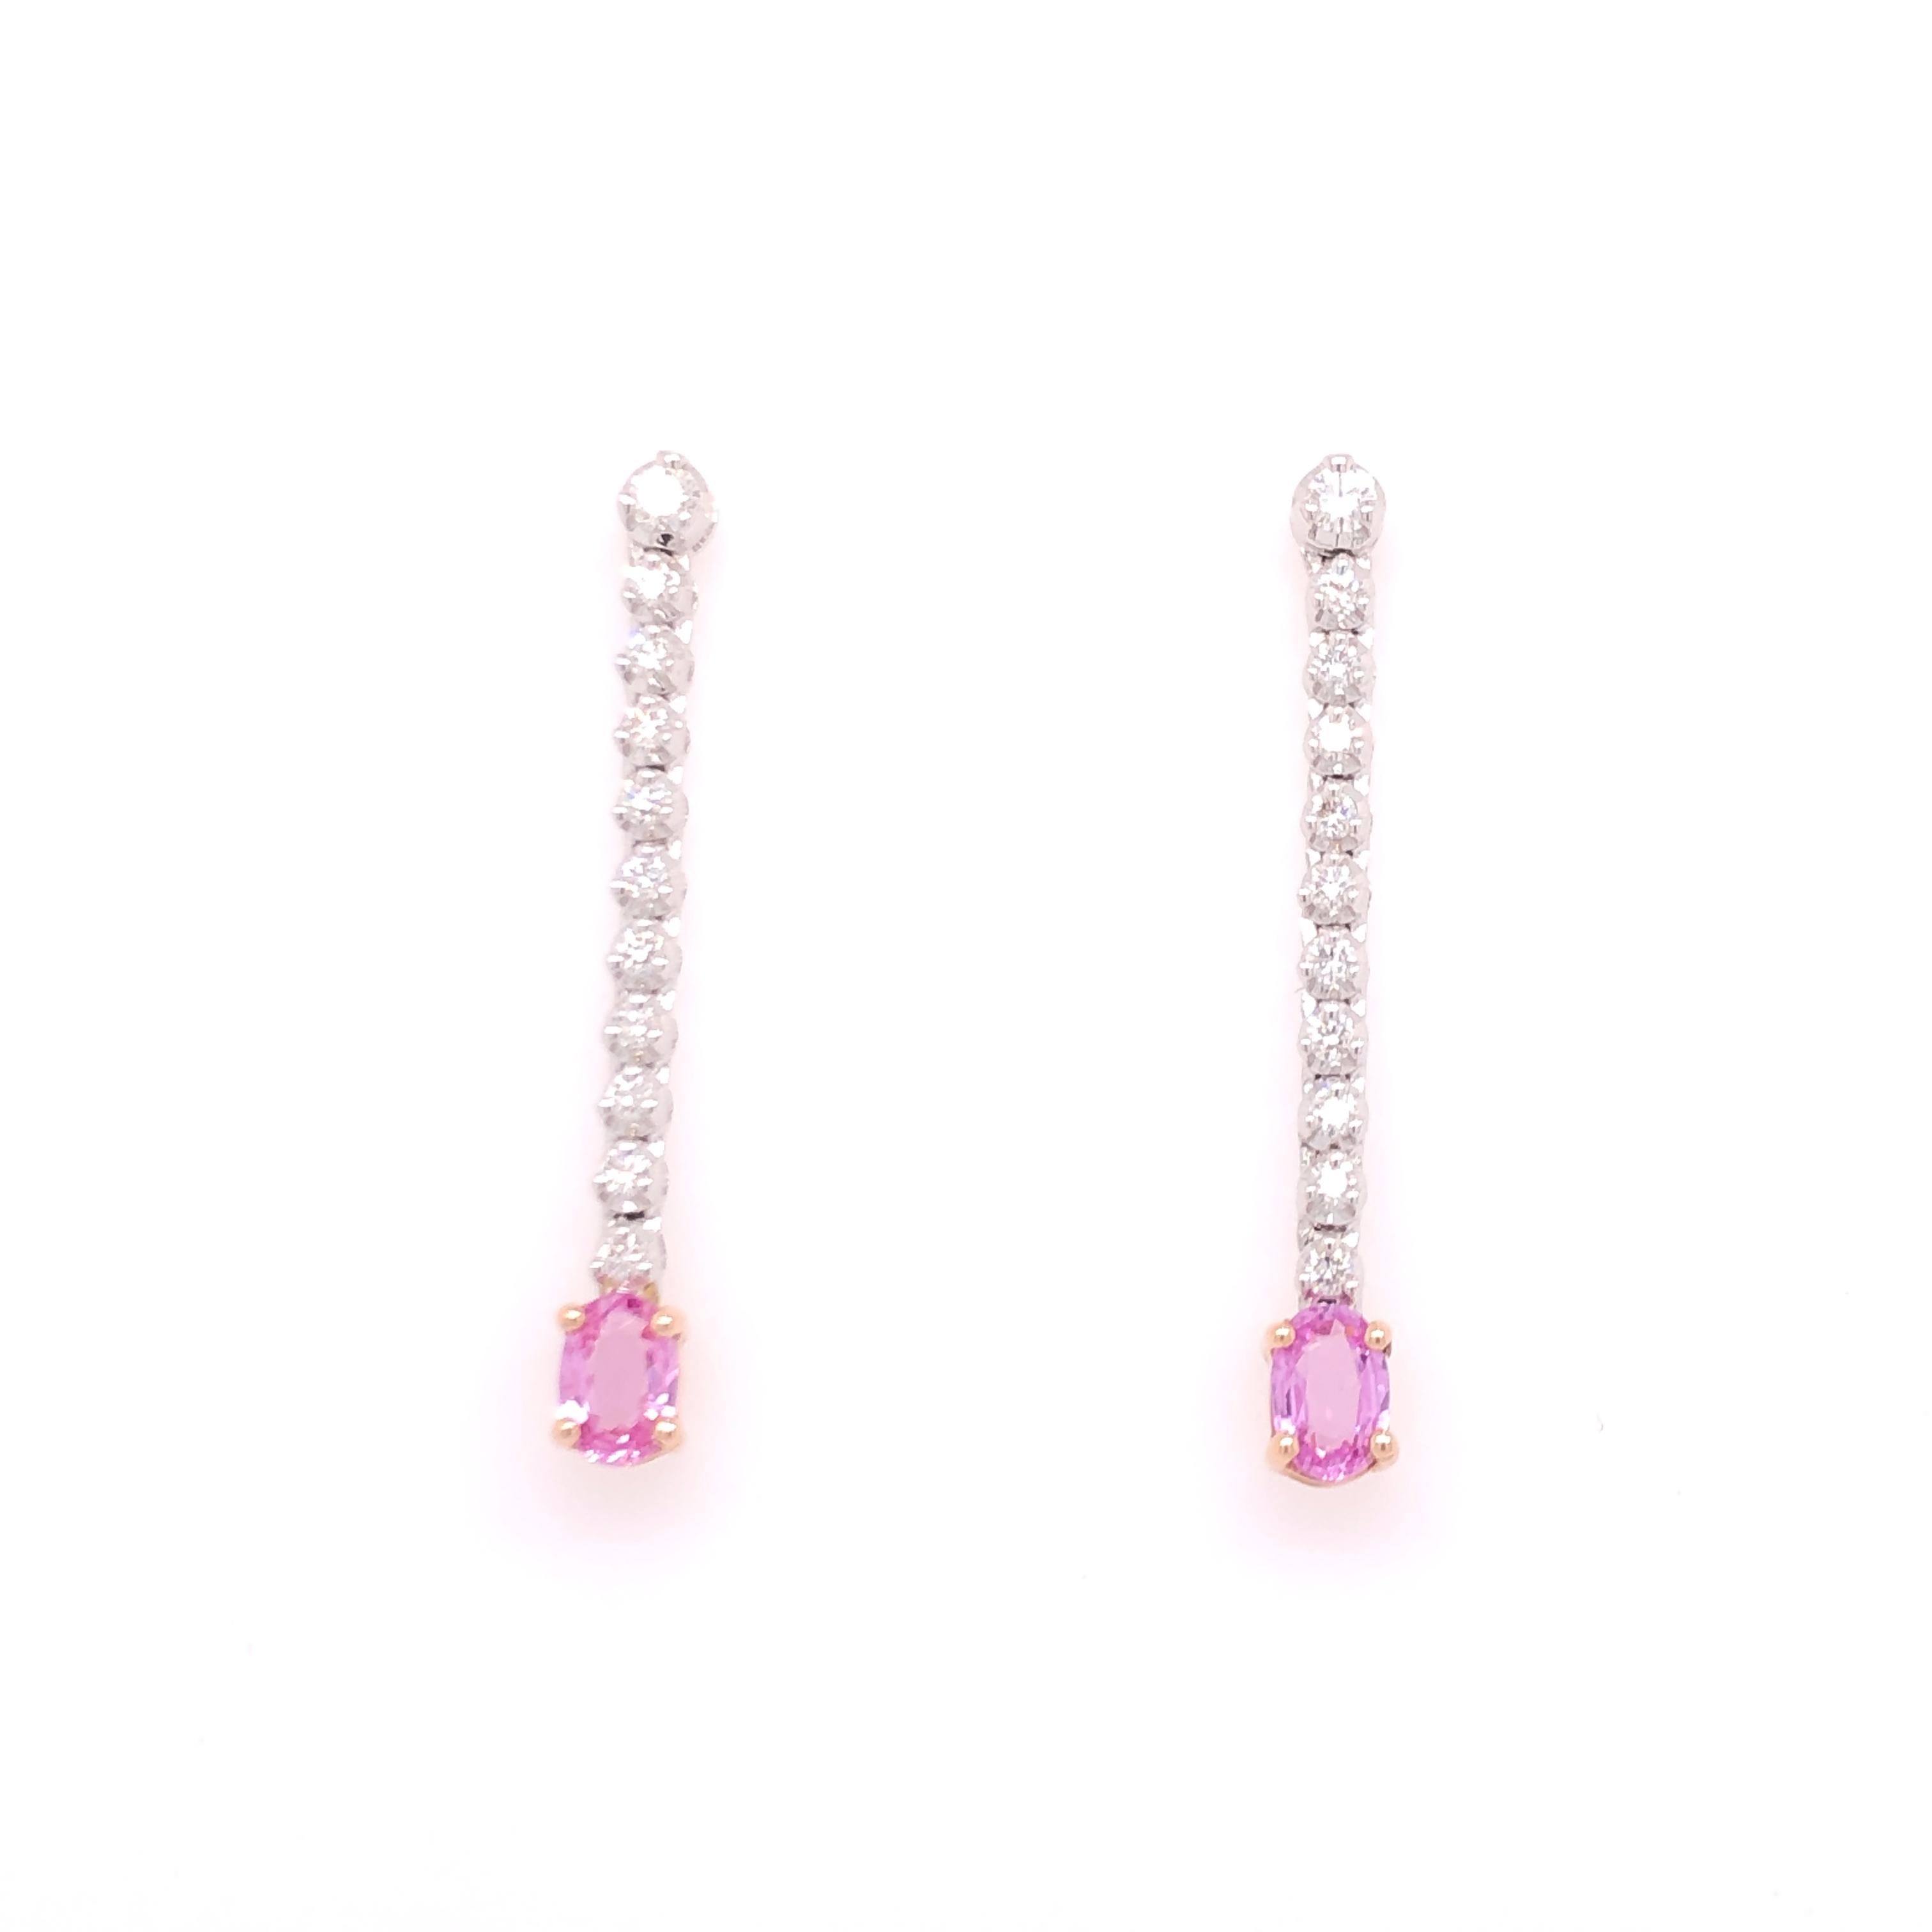 Light and refreshing, these pink sapphire and diamond earrings are the perfect finishing touch for spring time. The diamonds are set in 14K white gold to give them a brighter and lighter appearance, and the pink sapphires are set in 14K rose gold to